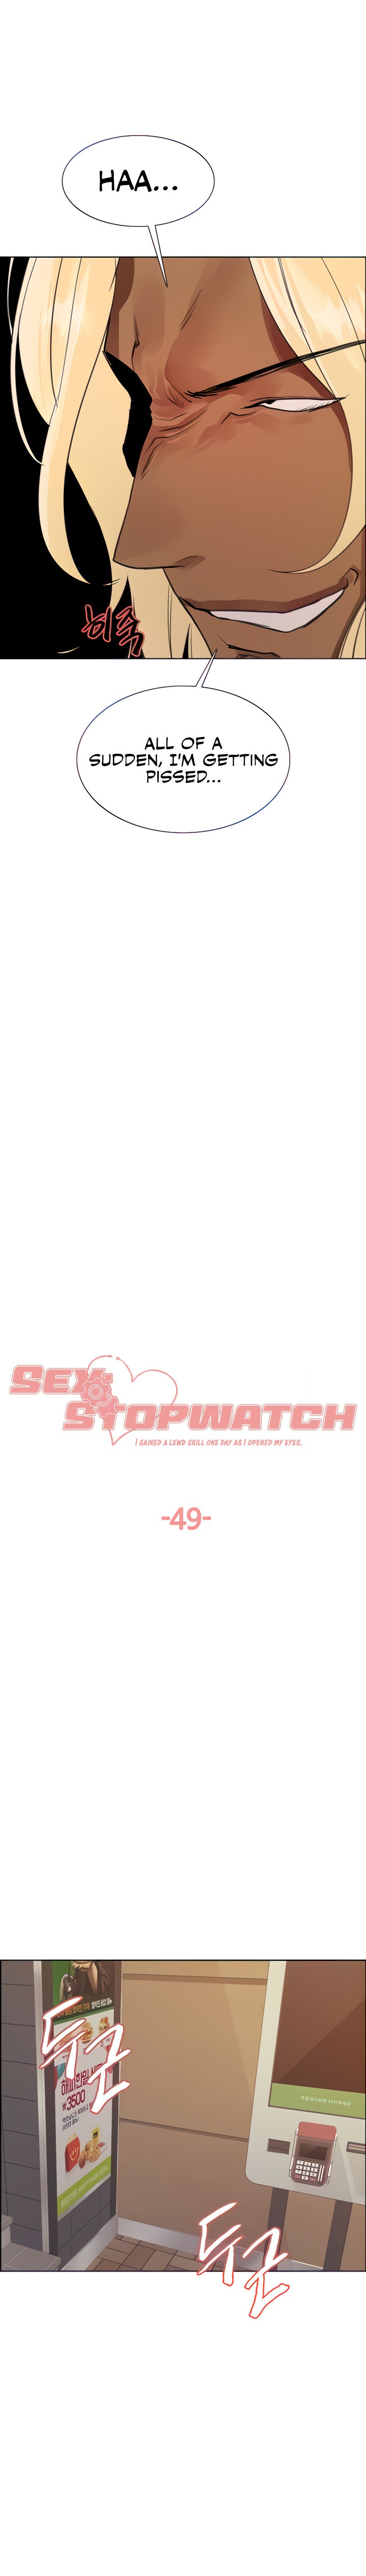 Sex Stopwatch Chapter 49 - Page 3